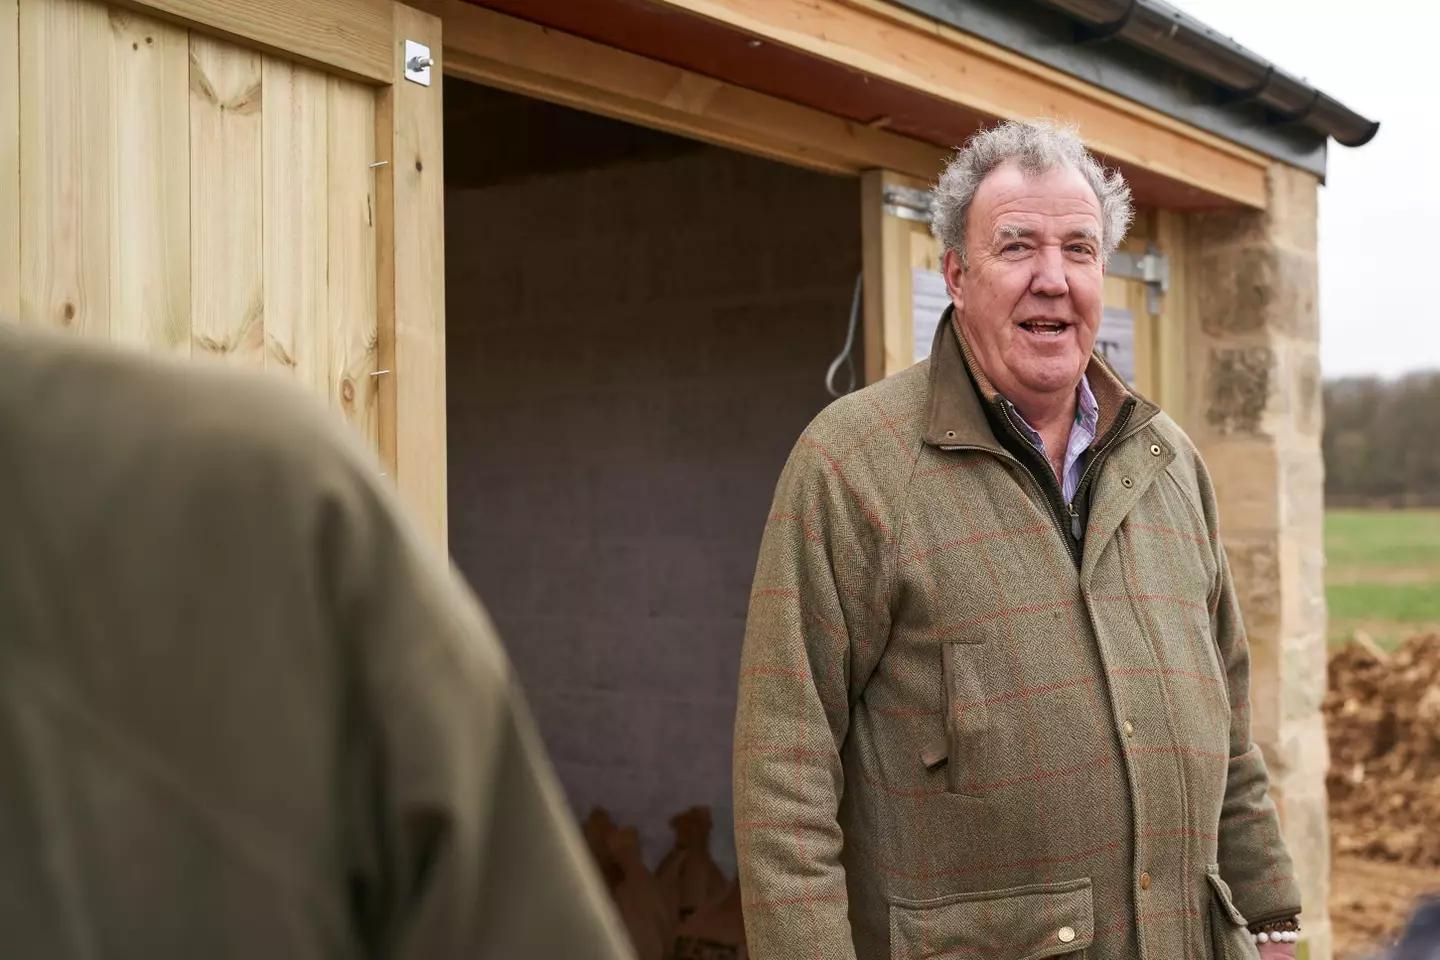 Jeremy Clarkson's controversial comments about Meghan Markle in his column for The Sun made many question his future on television.